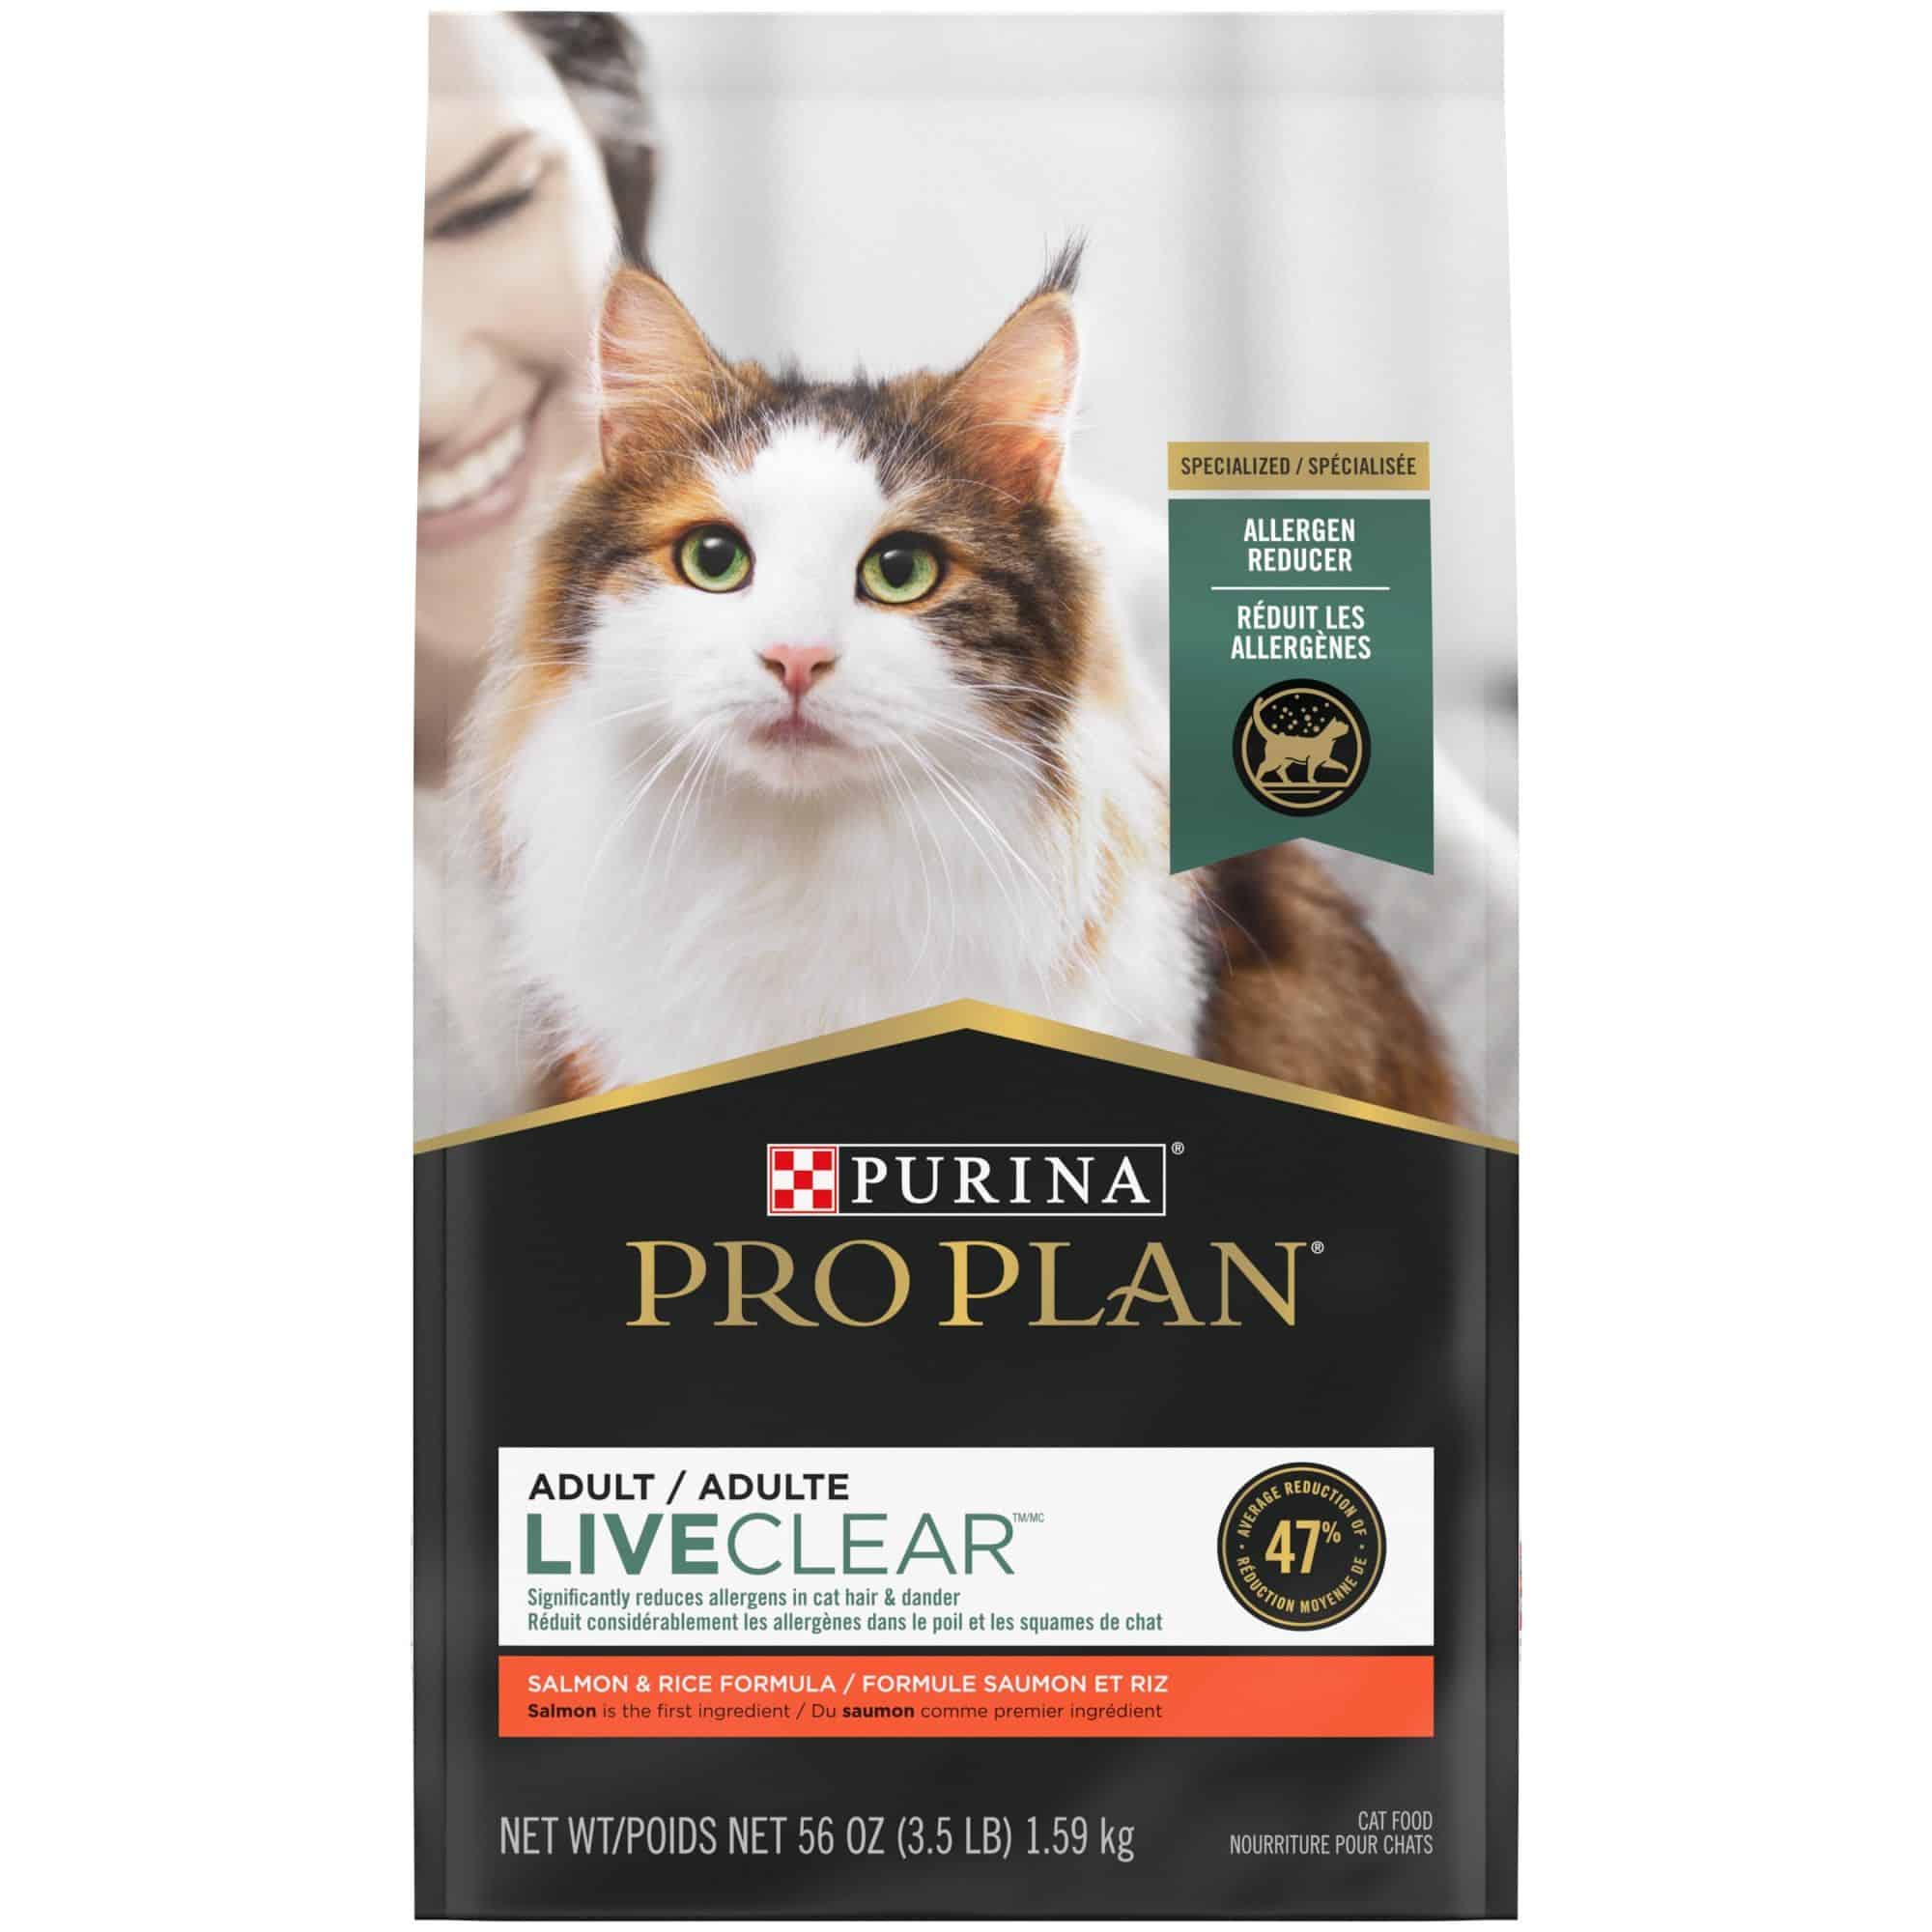 Purina Cat Food For Allergy